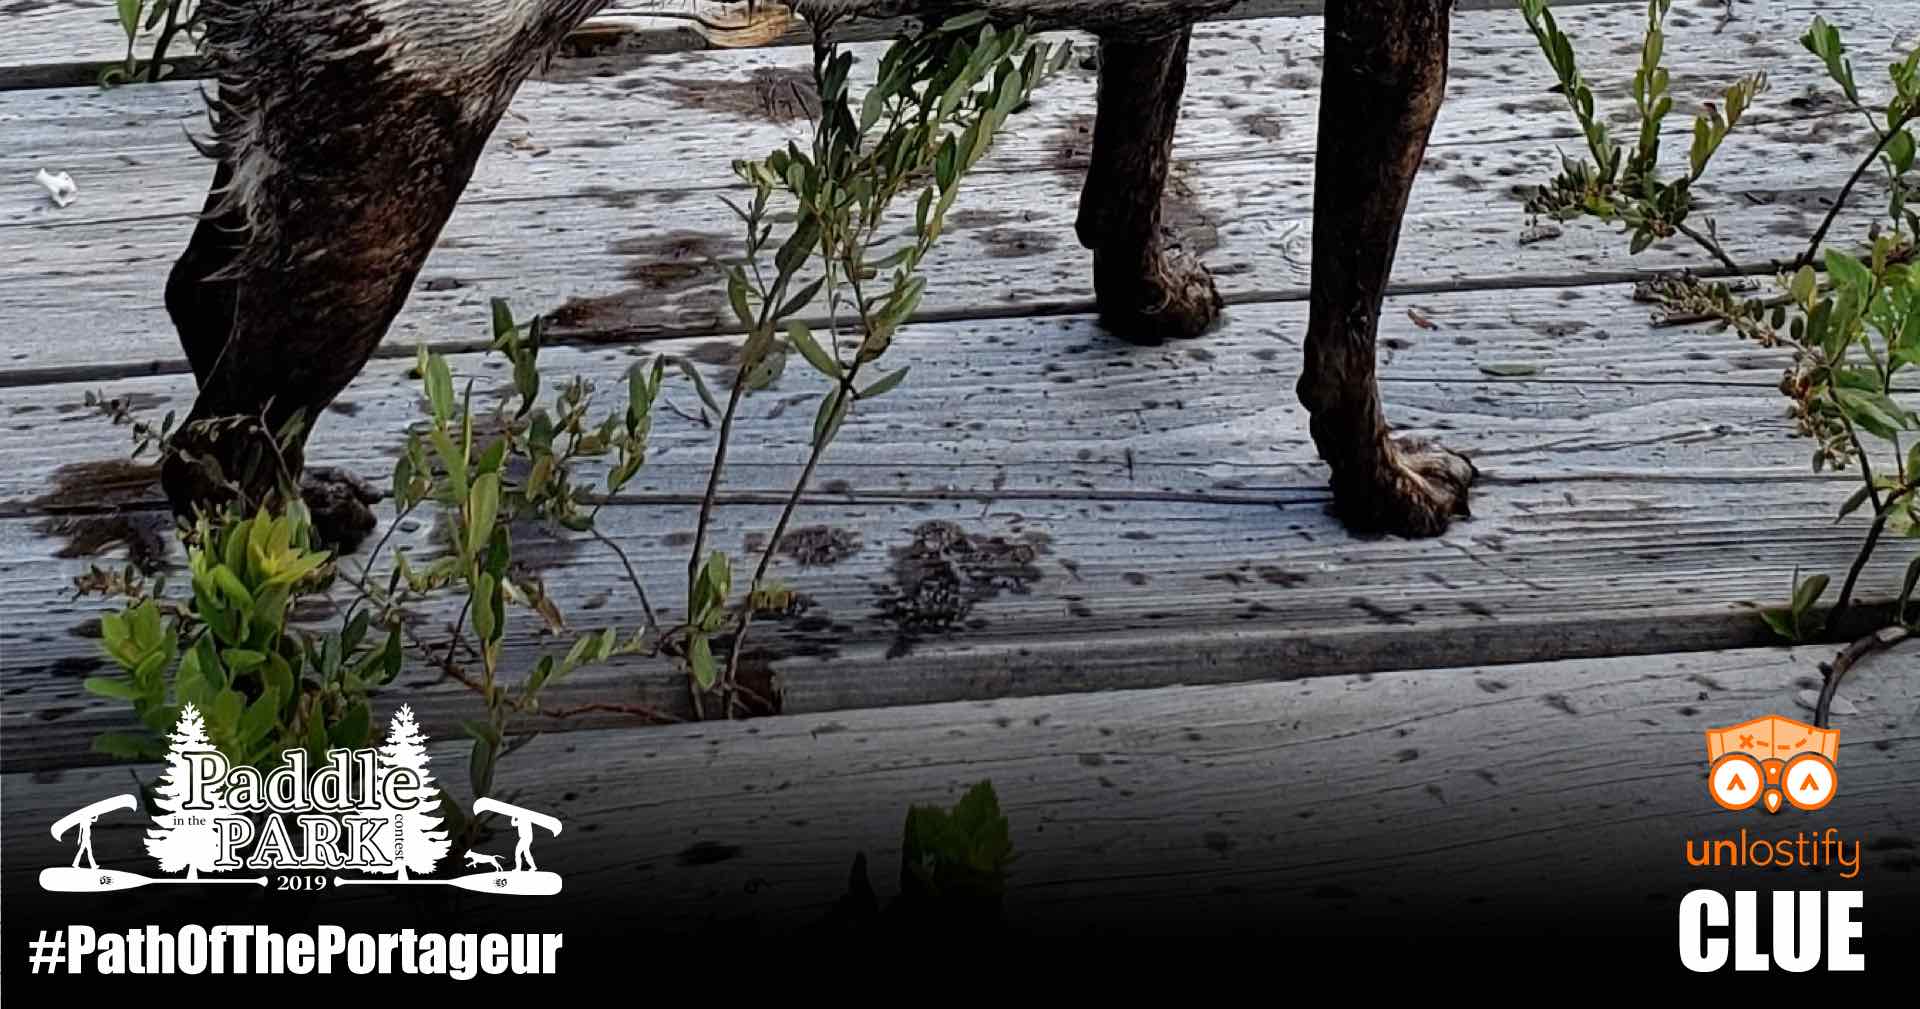 a dog's muddy and dirty paws are shown on the boardwalk of a portage